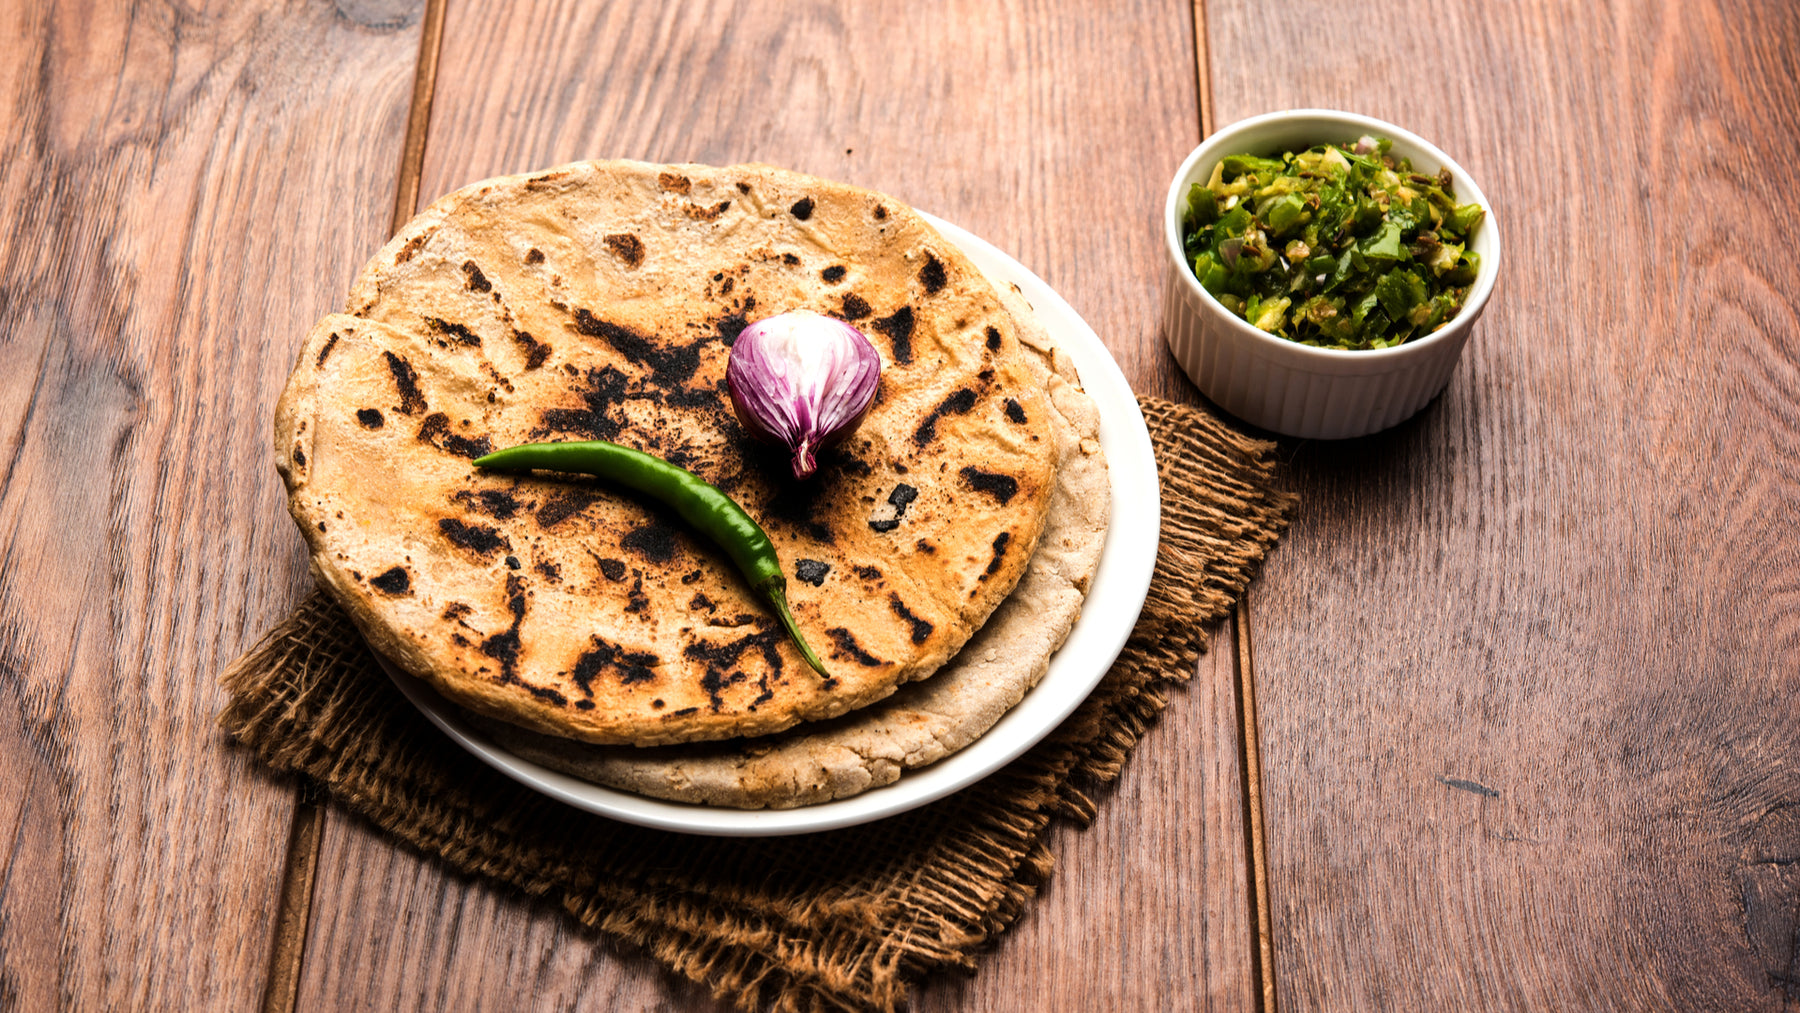 Can I Eat Jowar Or Bajra Chapatis On A Keto Diet?